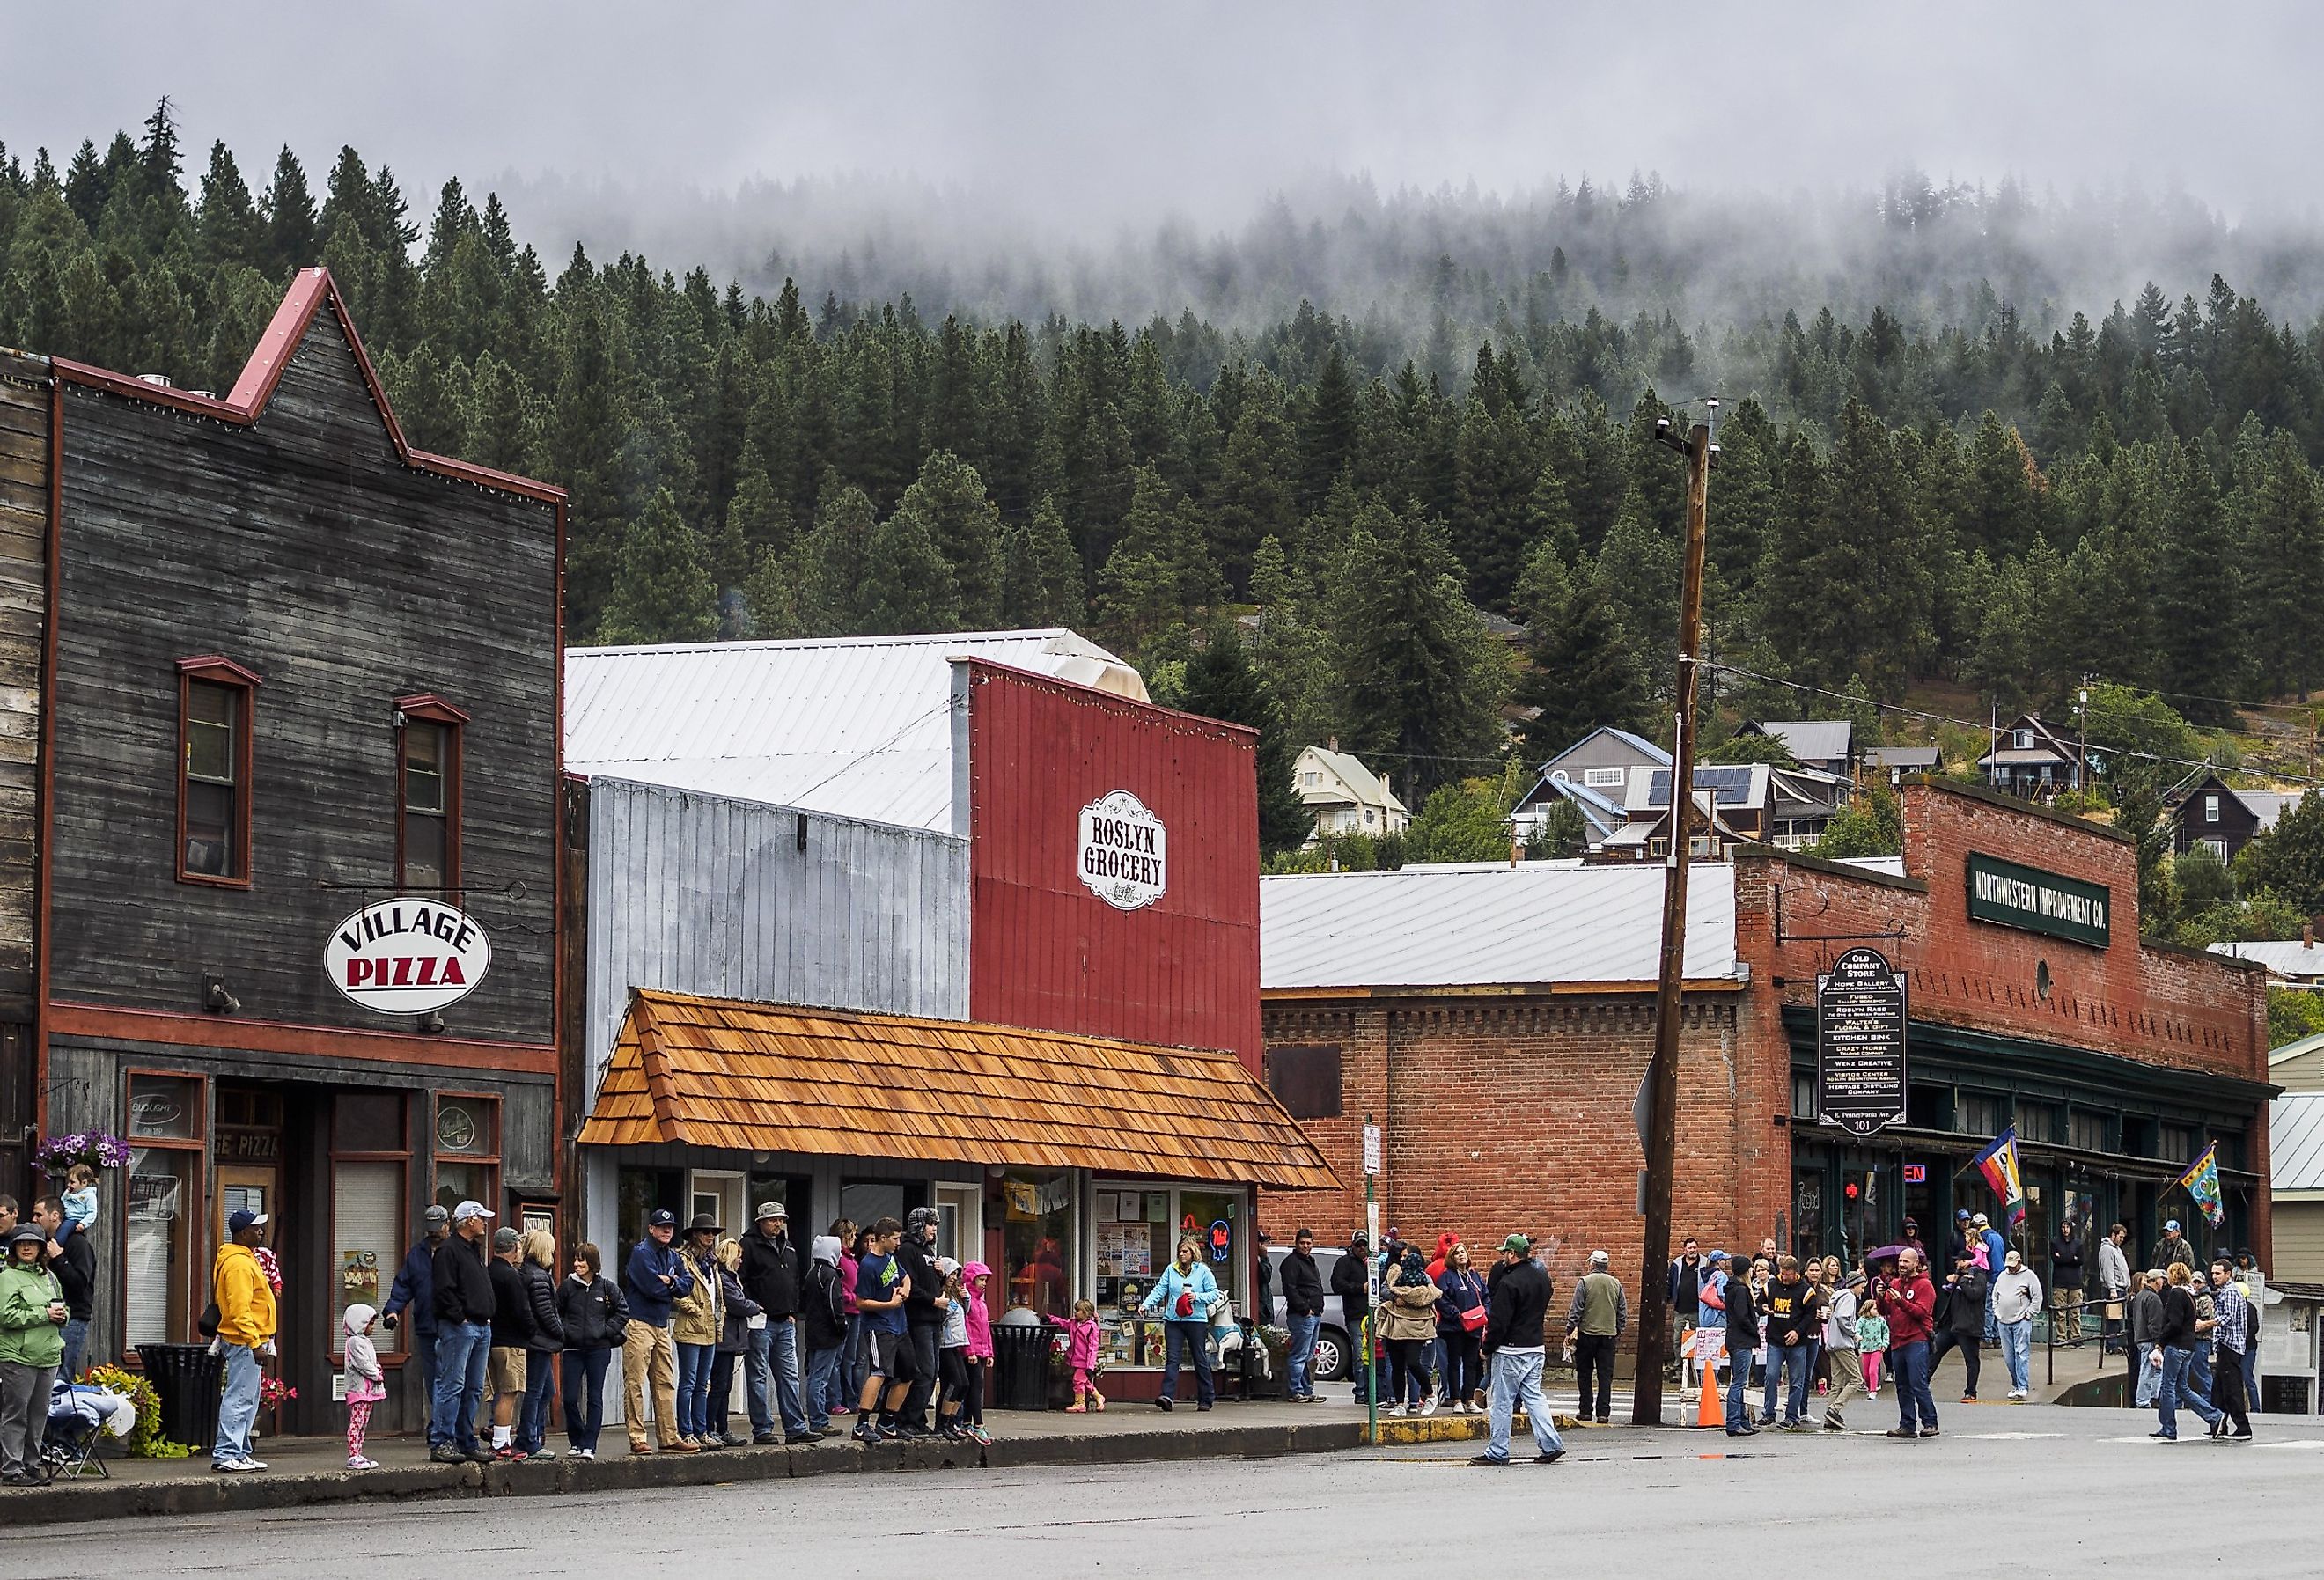 Labor day weekend parade attendees wait on the historic old town street, Roslyn, Washington.